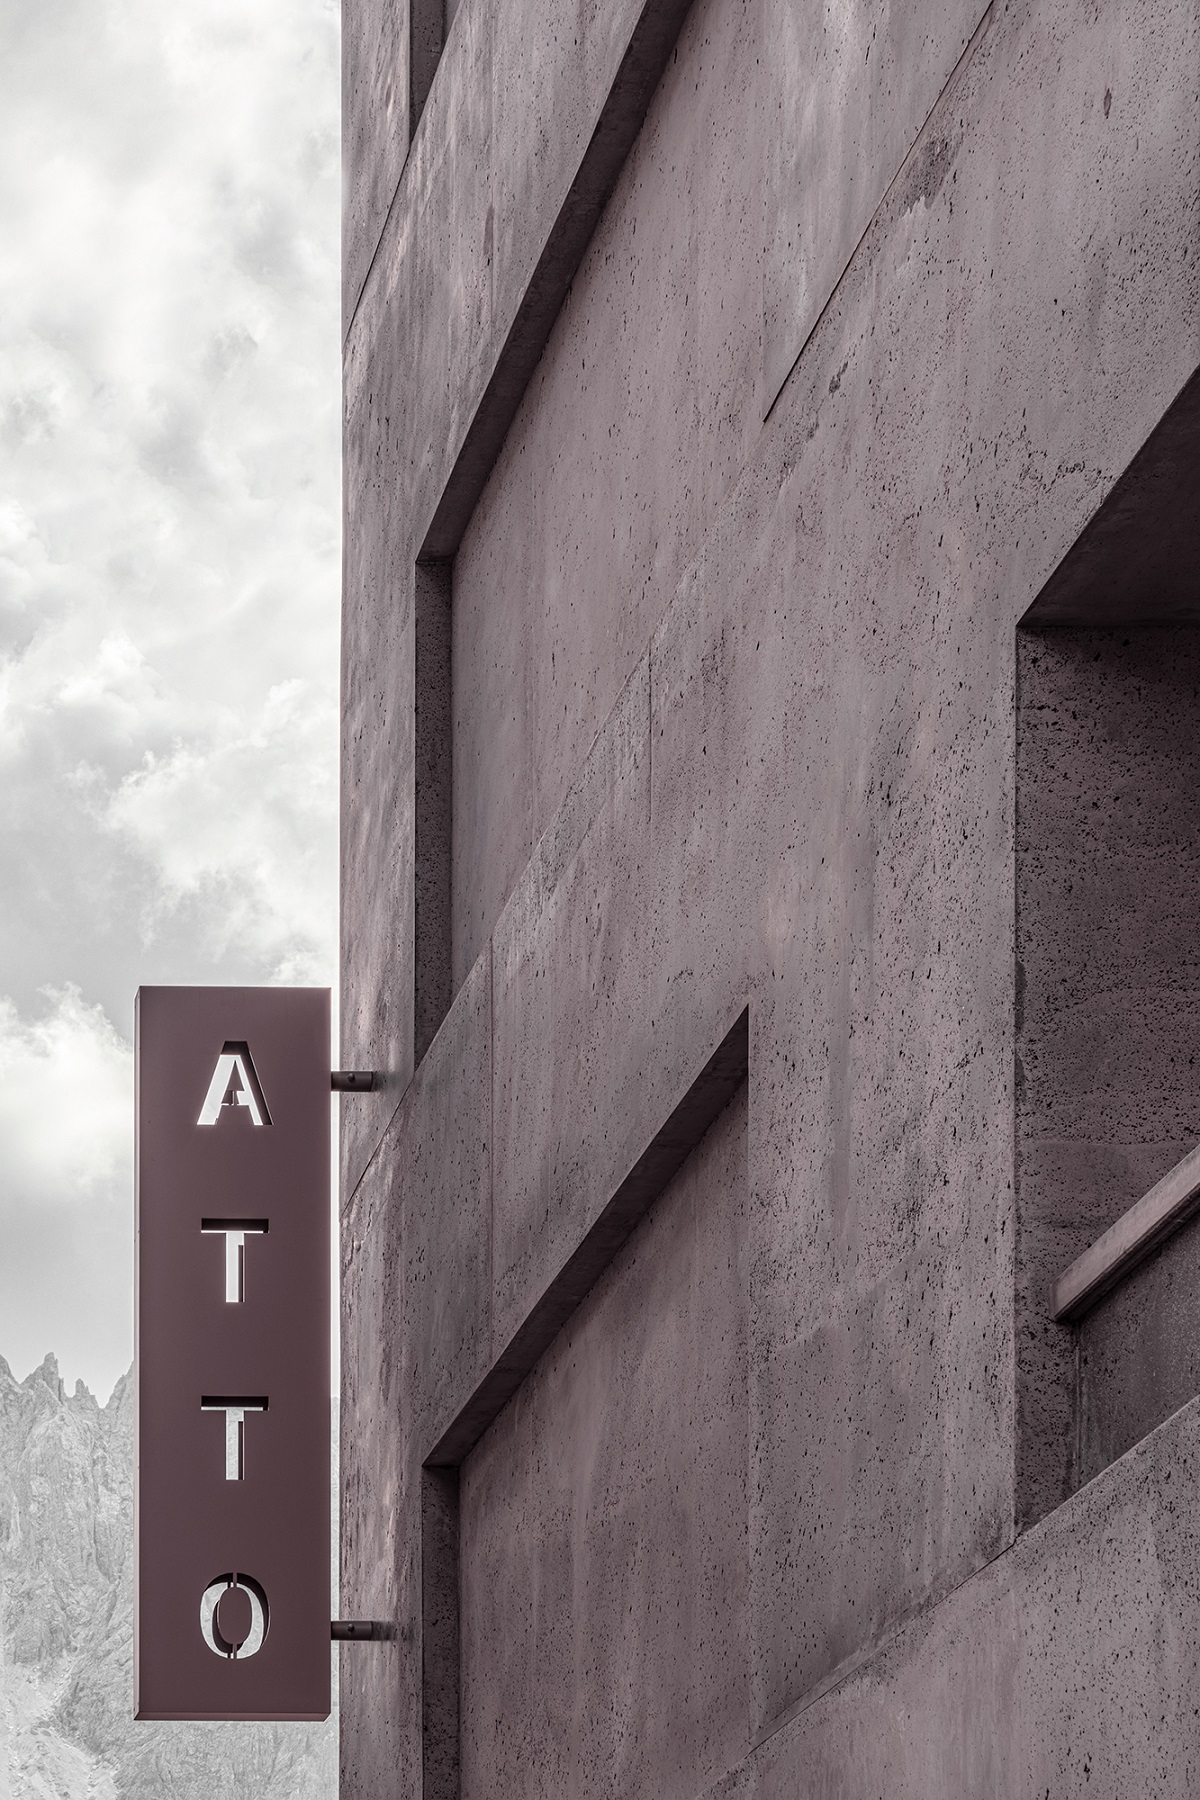 brutalist concrete facade with hotel signage